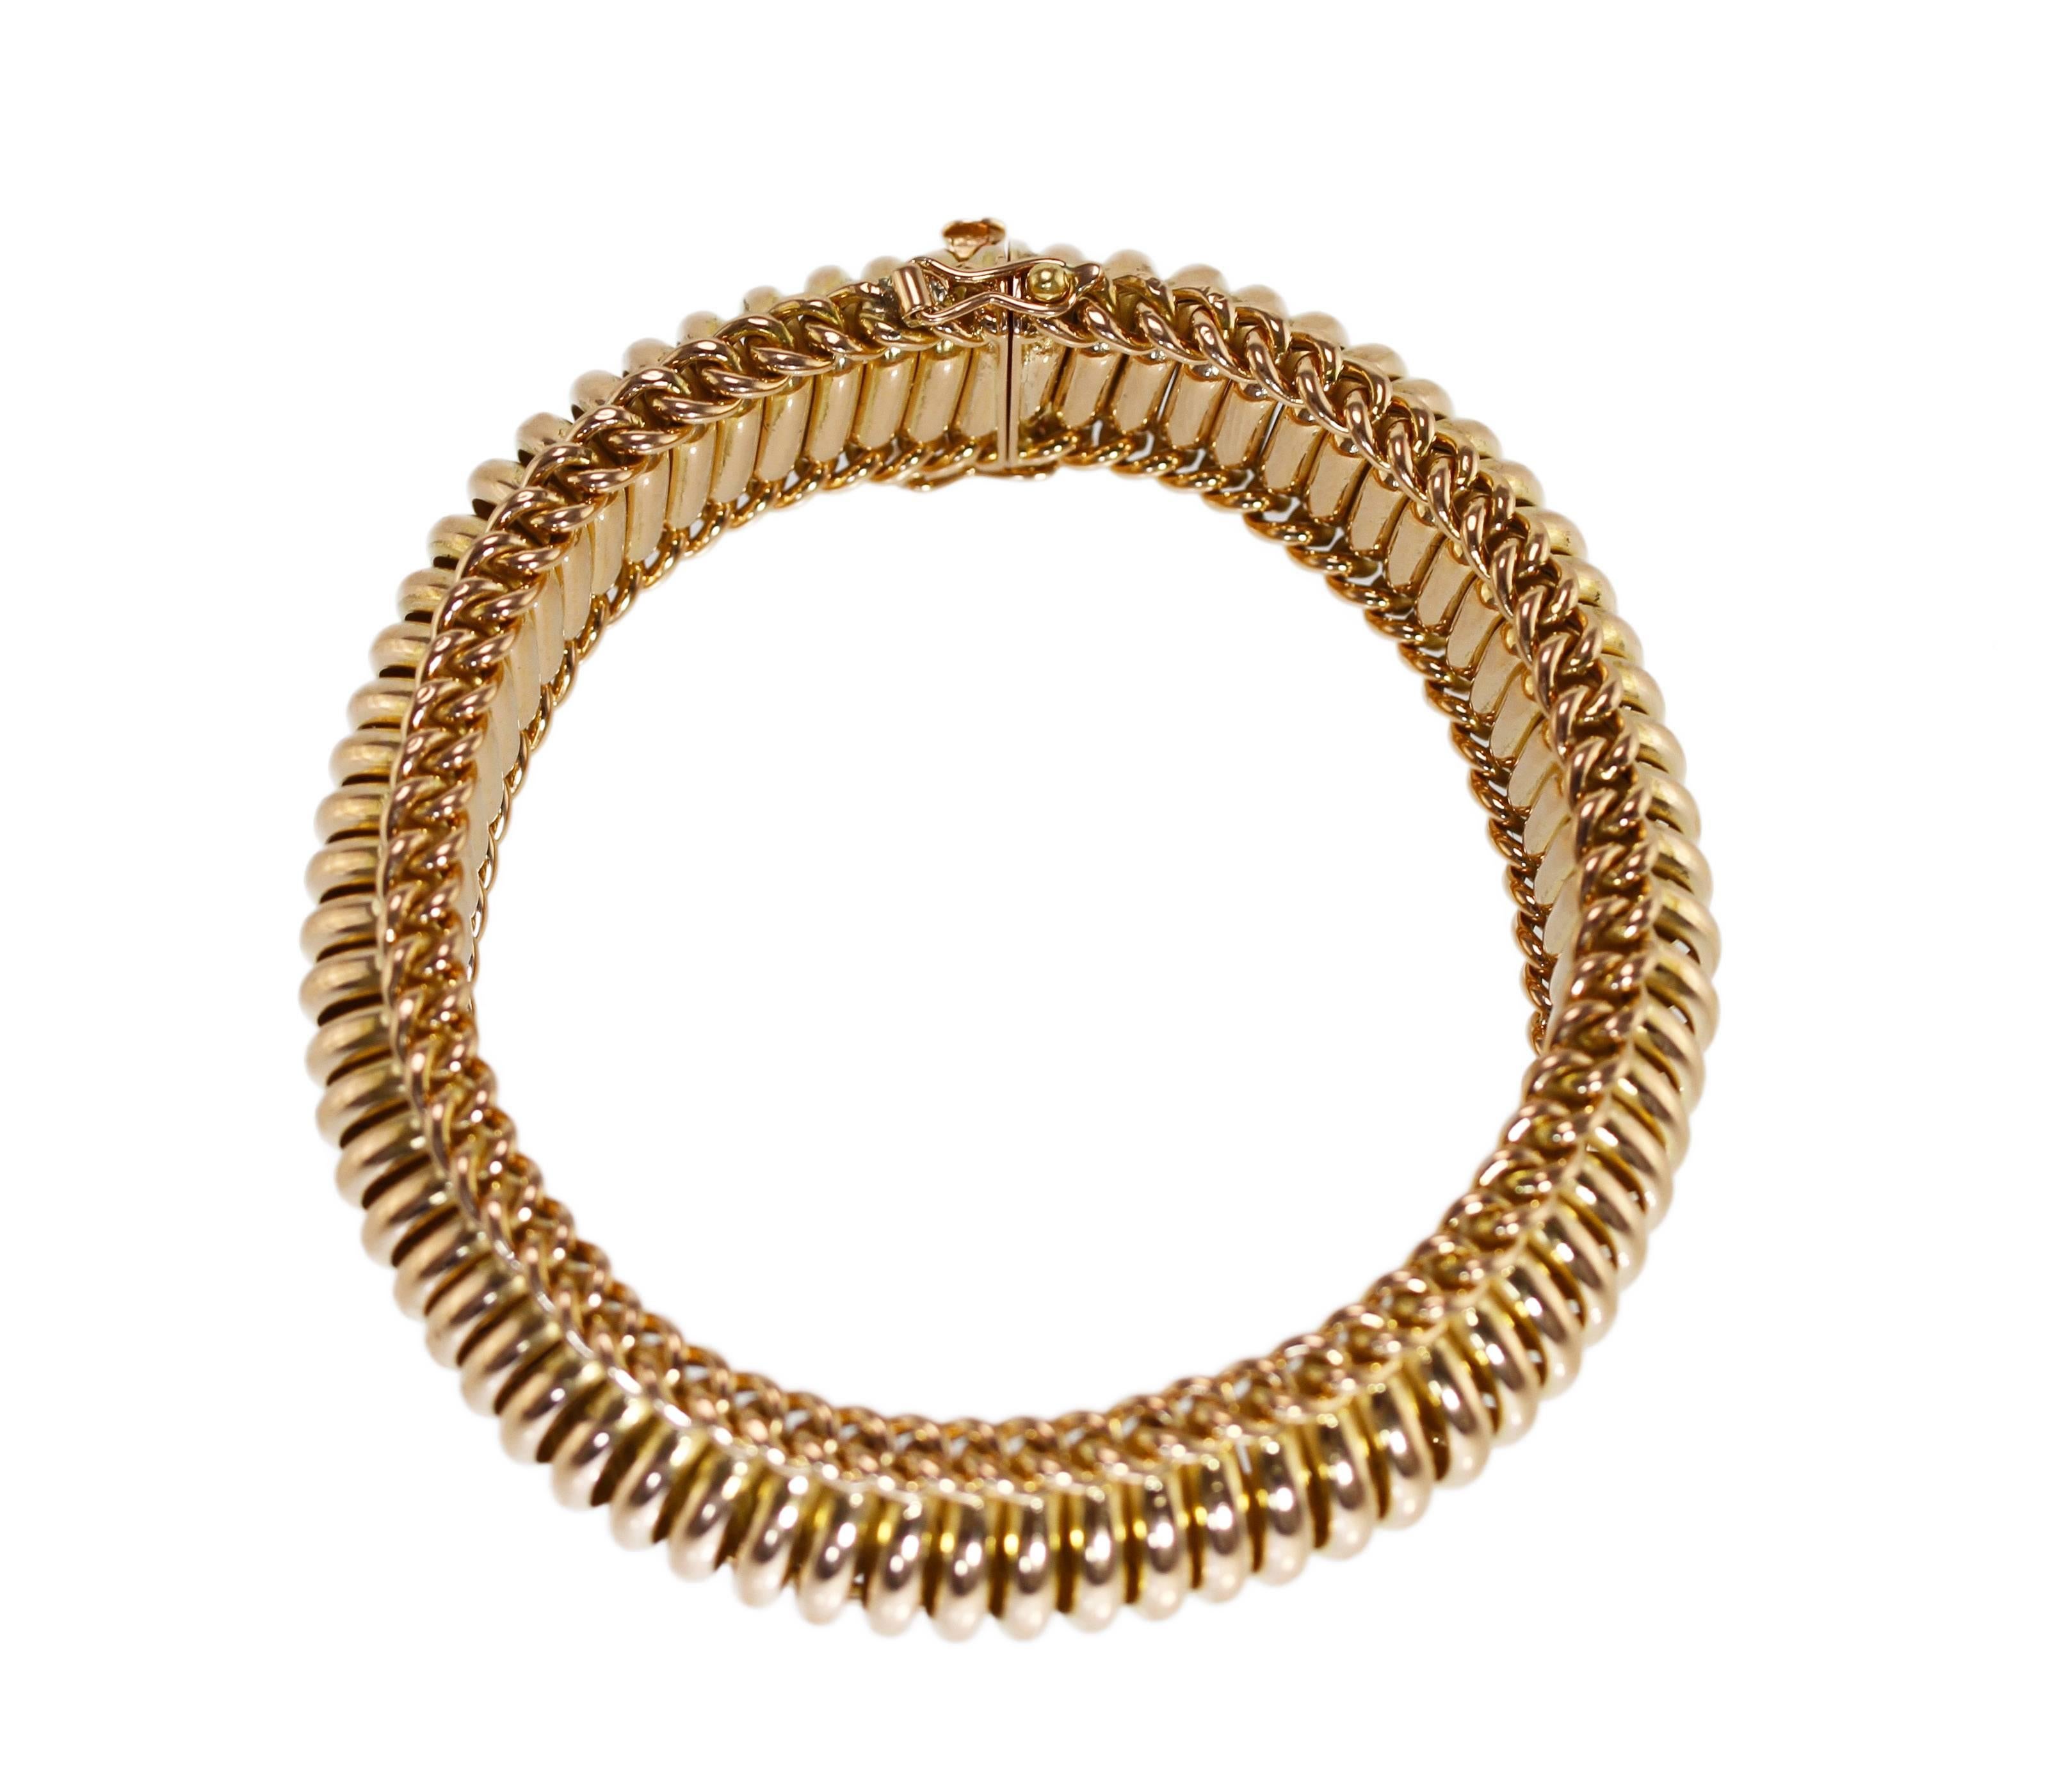 An 18 karat gold bracelet, France, designed as multiple hollow-link tubes perpendicularly lining the bracelet, length 7 1/2 inches, width 3/4 inch, gross weight 38.7 grams, with French assay marks.